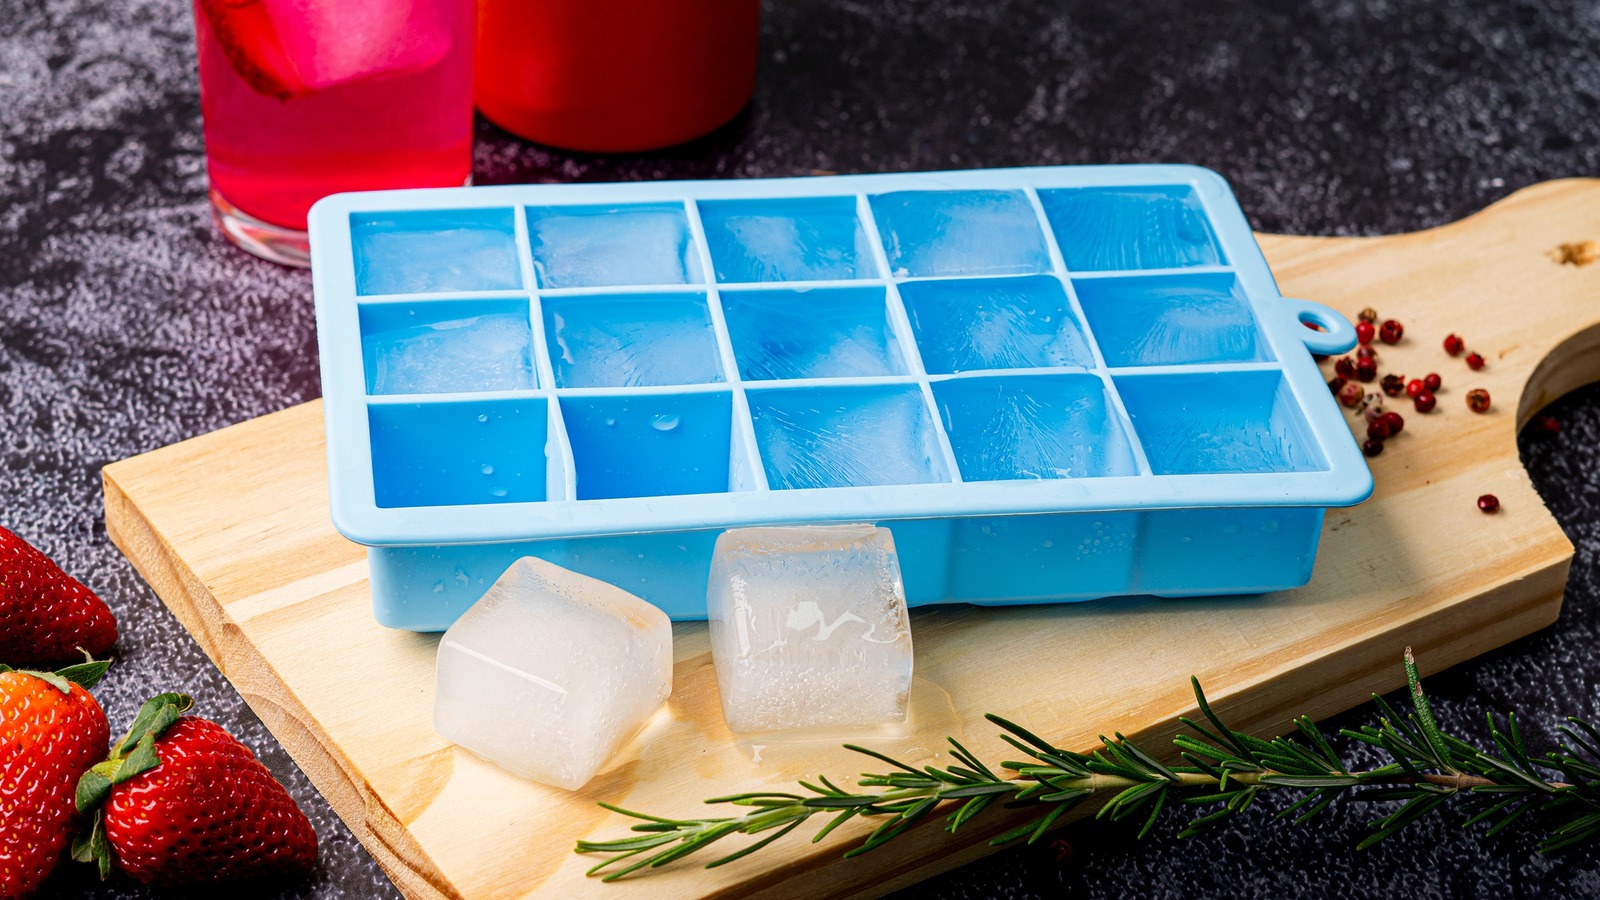 https://www.mashed.com/img/gallery/15-unexpected-ways-to-use-your-ice-cube-tray/l-intro-1682107075.jpg